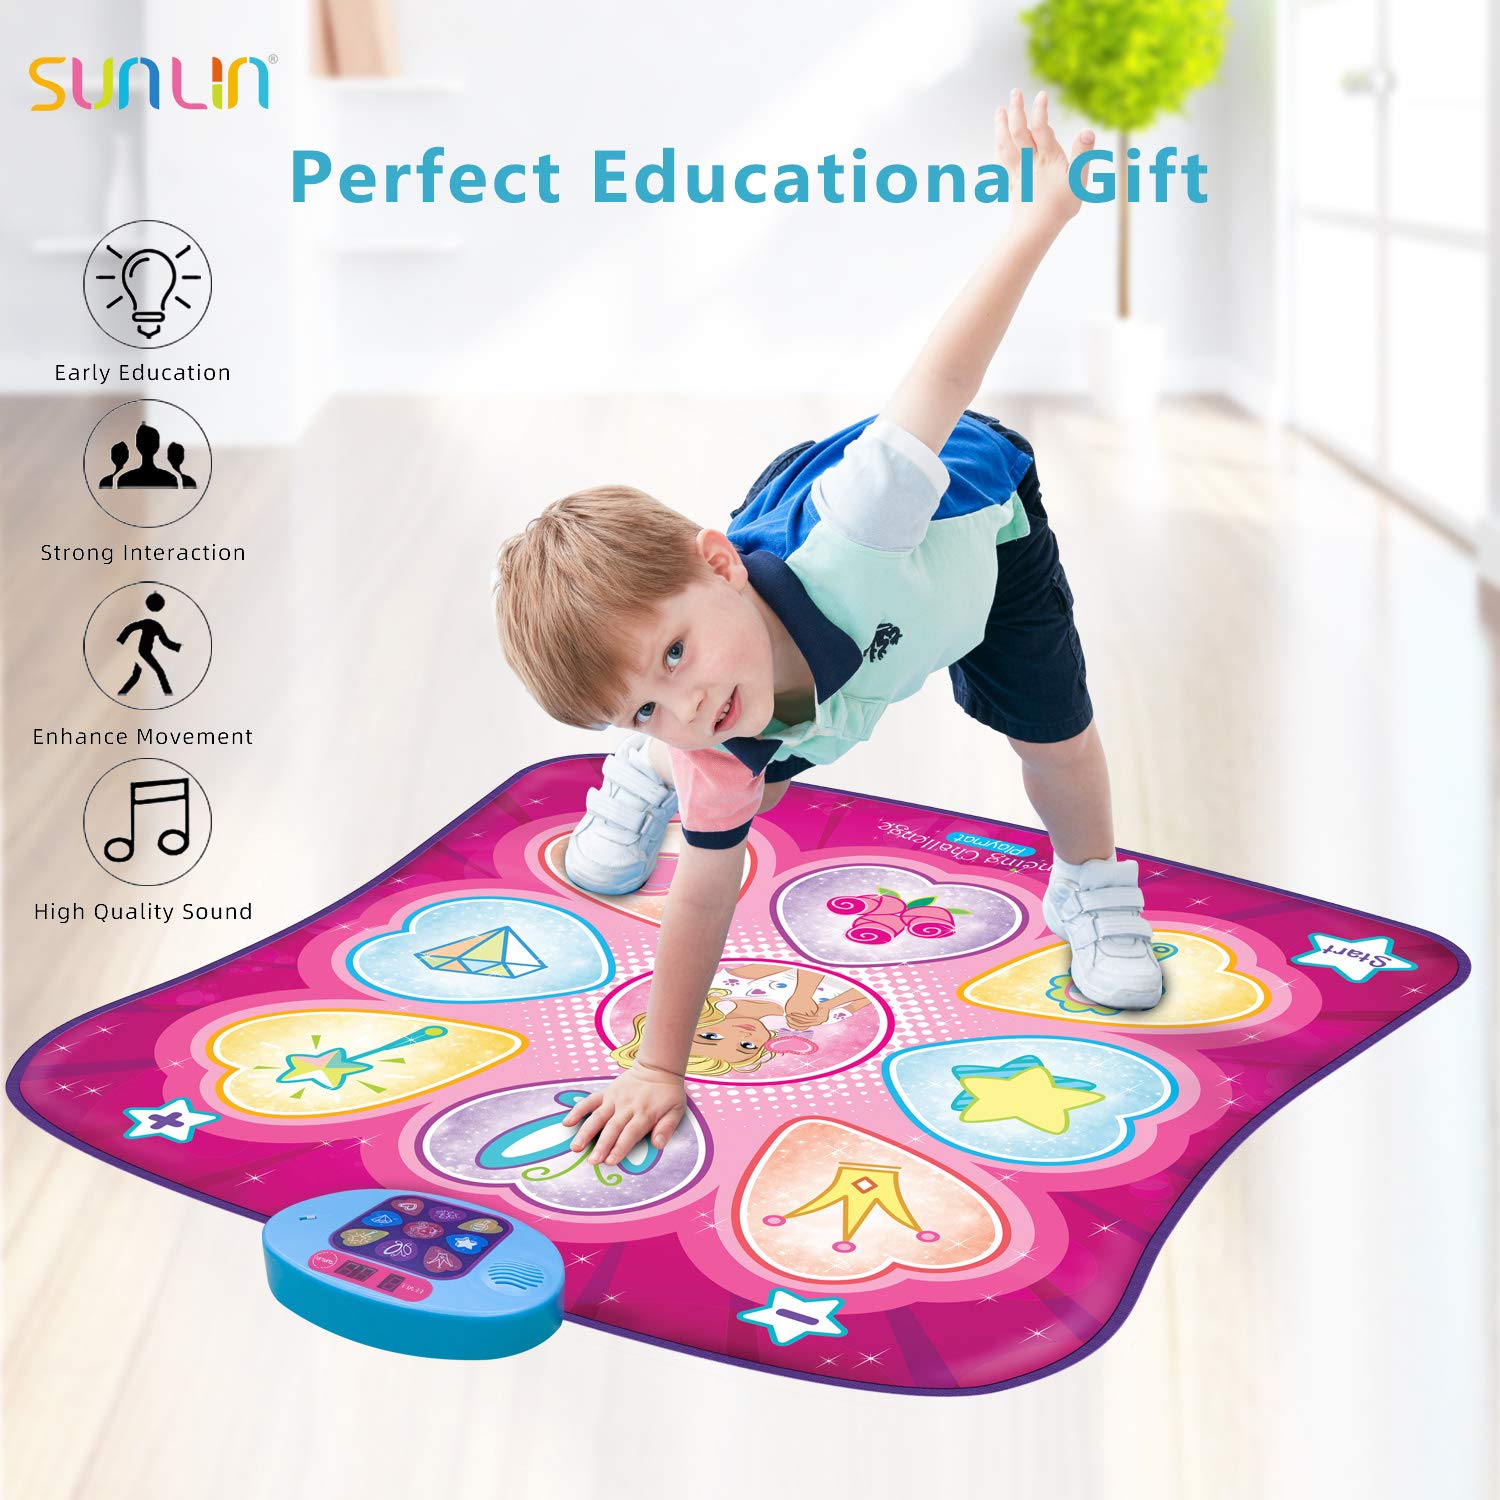 SUNLIN Dance Mat - Dance Mixer Rhythm Step Play Mat - Dance Game Toy Gift for Kids Girls Boys - Dance Pad with LED Lights, Adjustable Volume, Built-in Music, 3 Challenge Levels (35.4"X36.6")